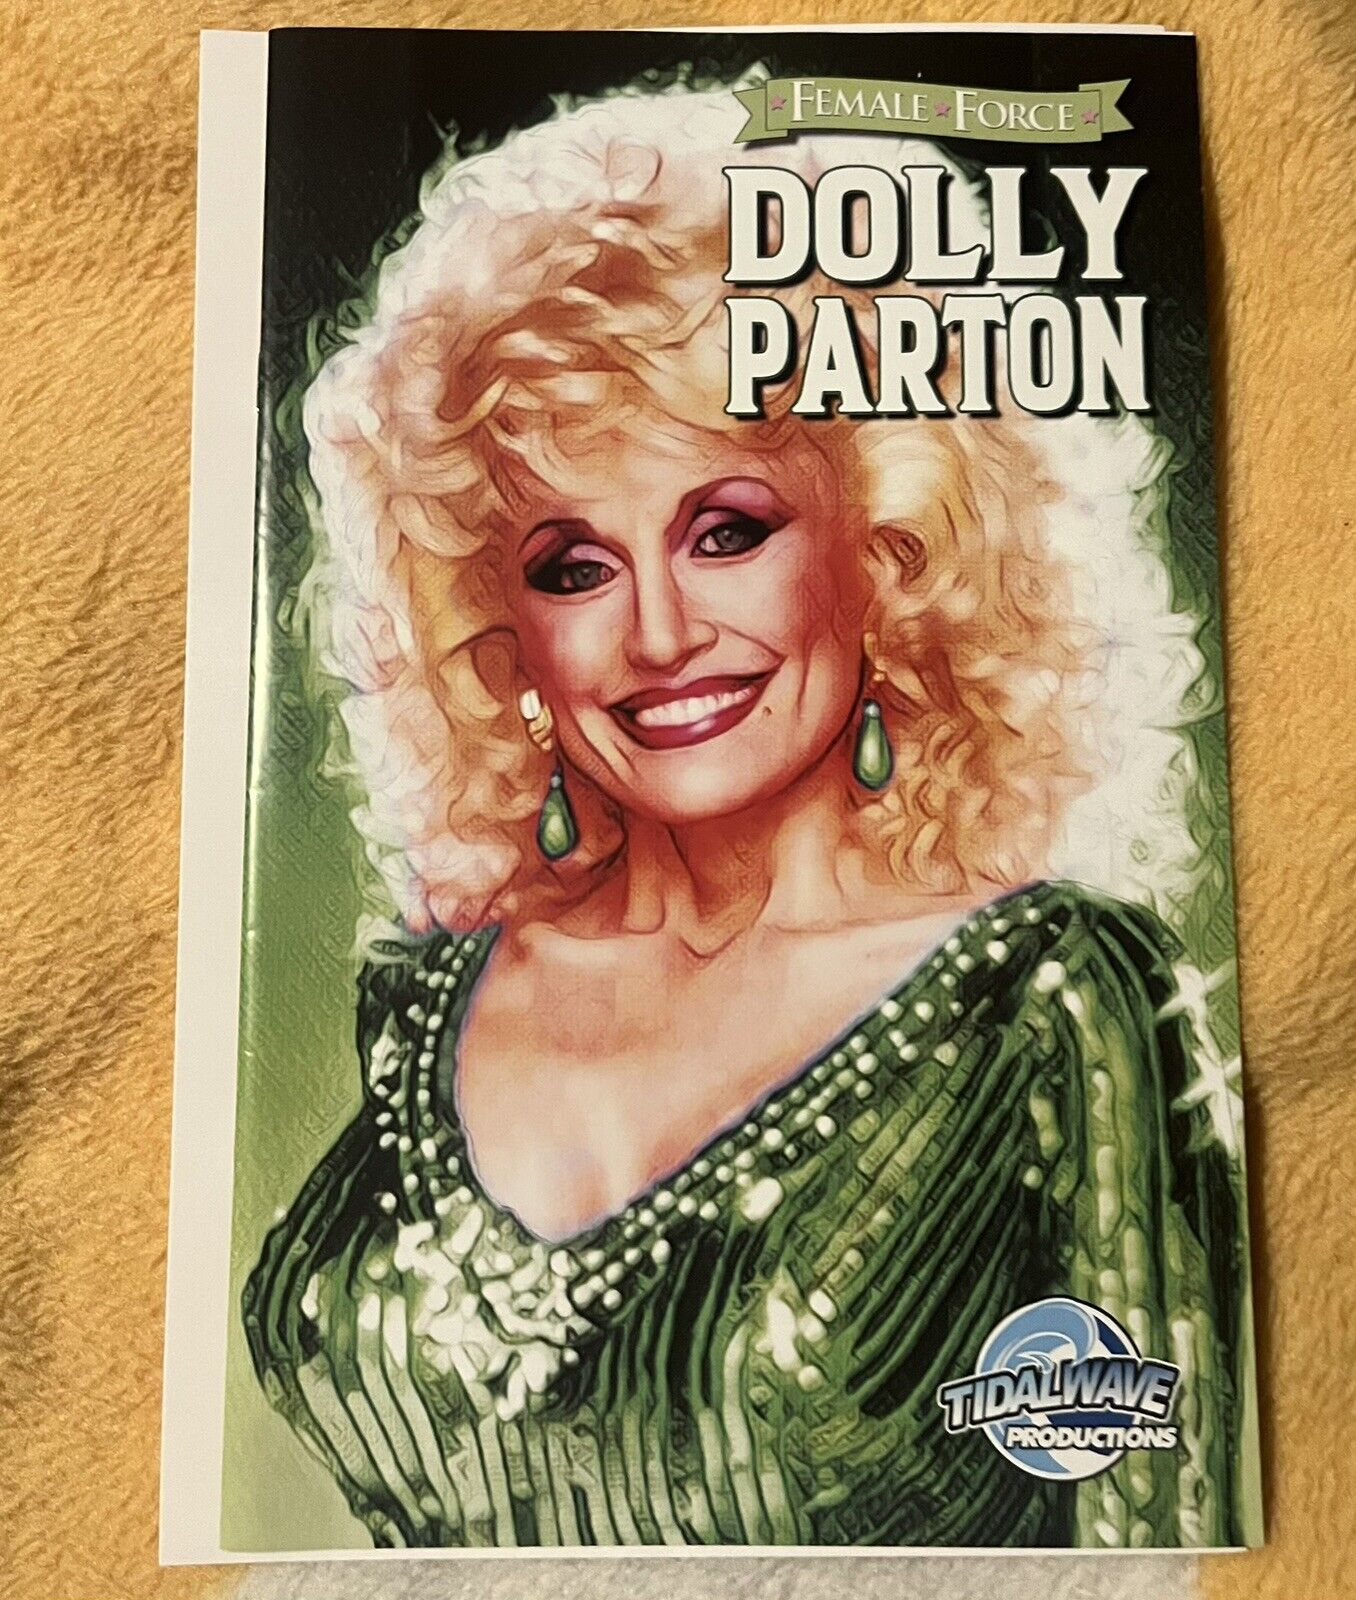 Female Force: Dolly Parton Hardcover comic book, Green Dress